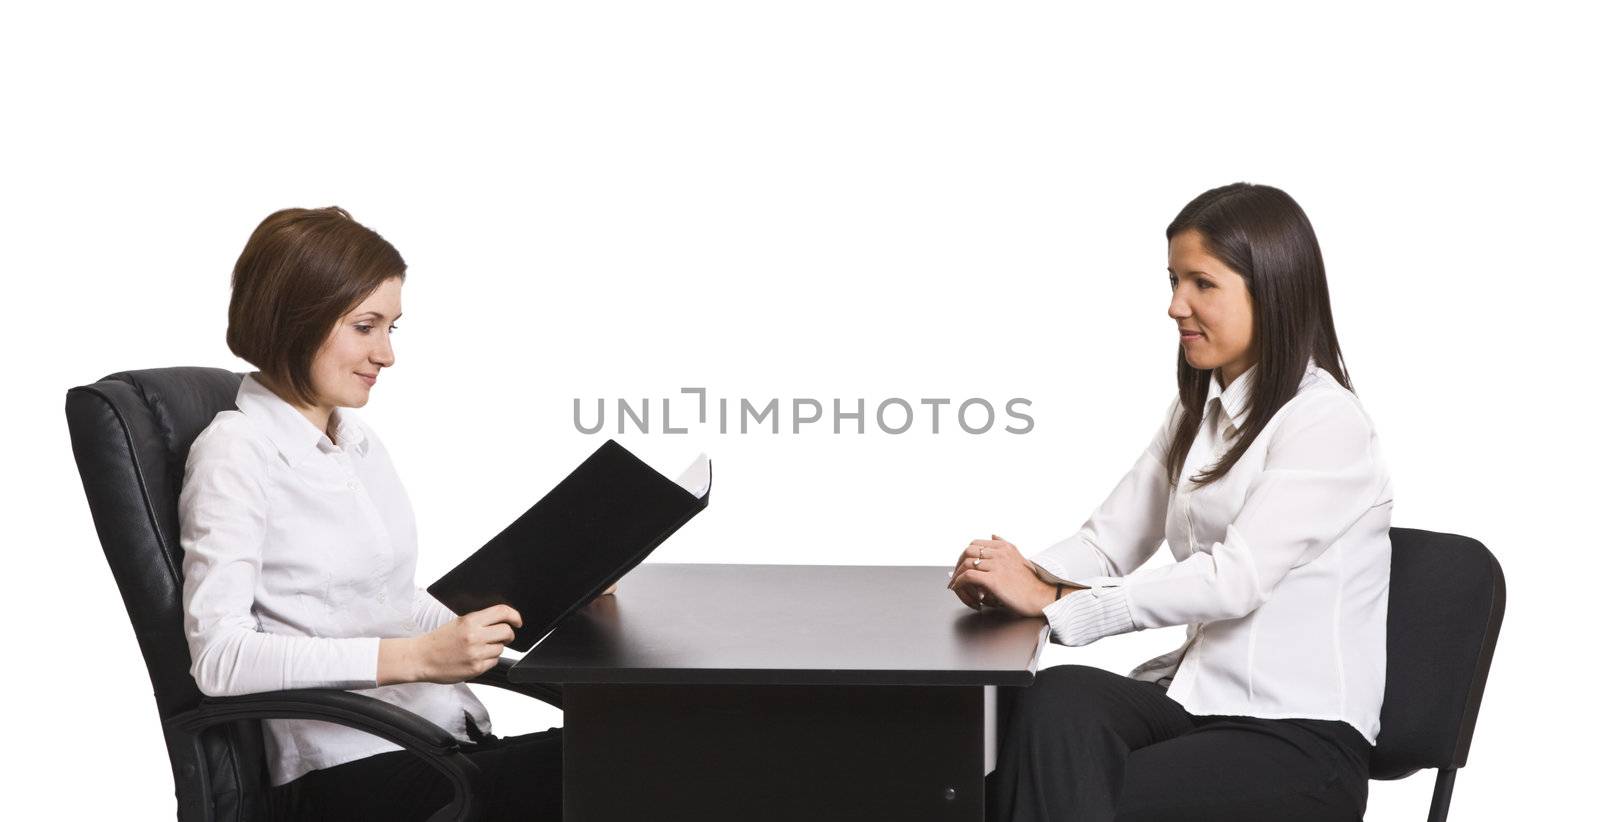 Two businesswomen at an interview in an office isolated against a white background.